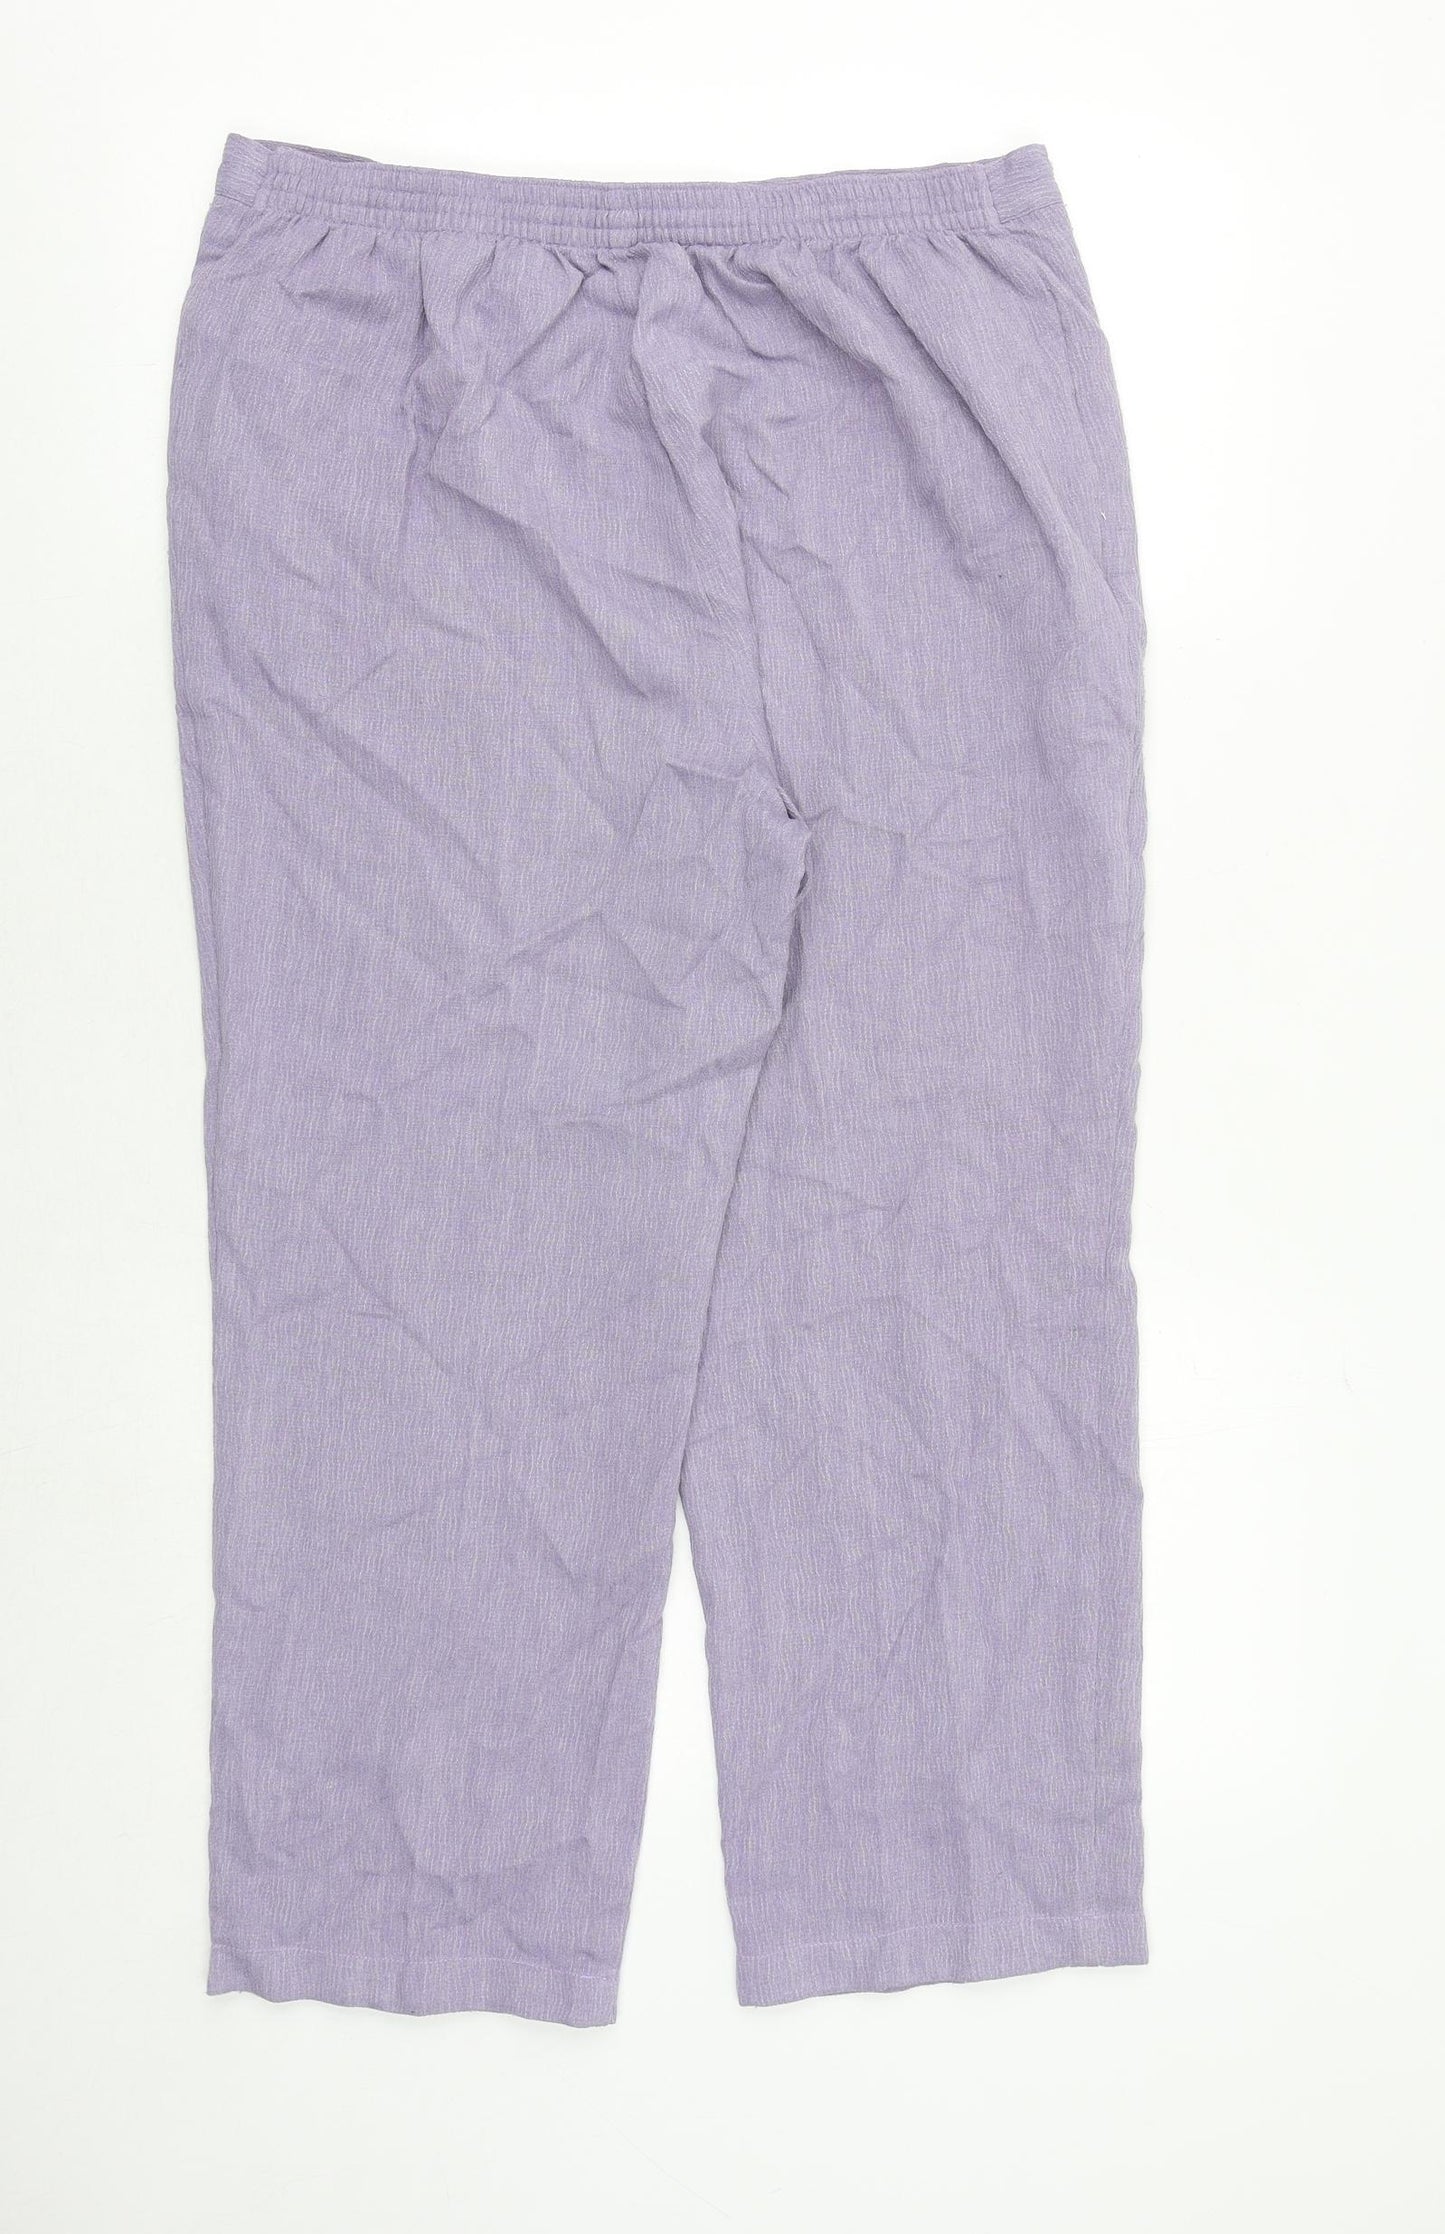 Marks and Spencer Womens Purple Polyester Dress Pants Trousers Size 16 Regular